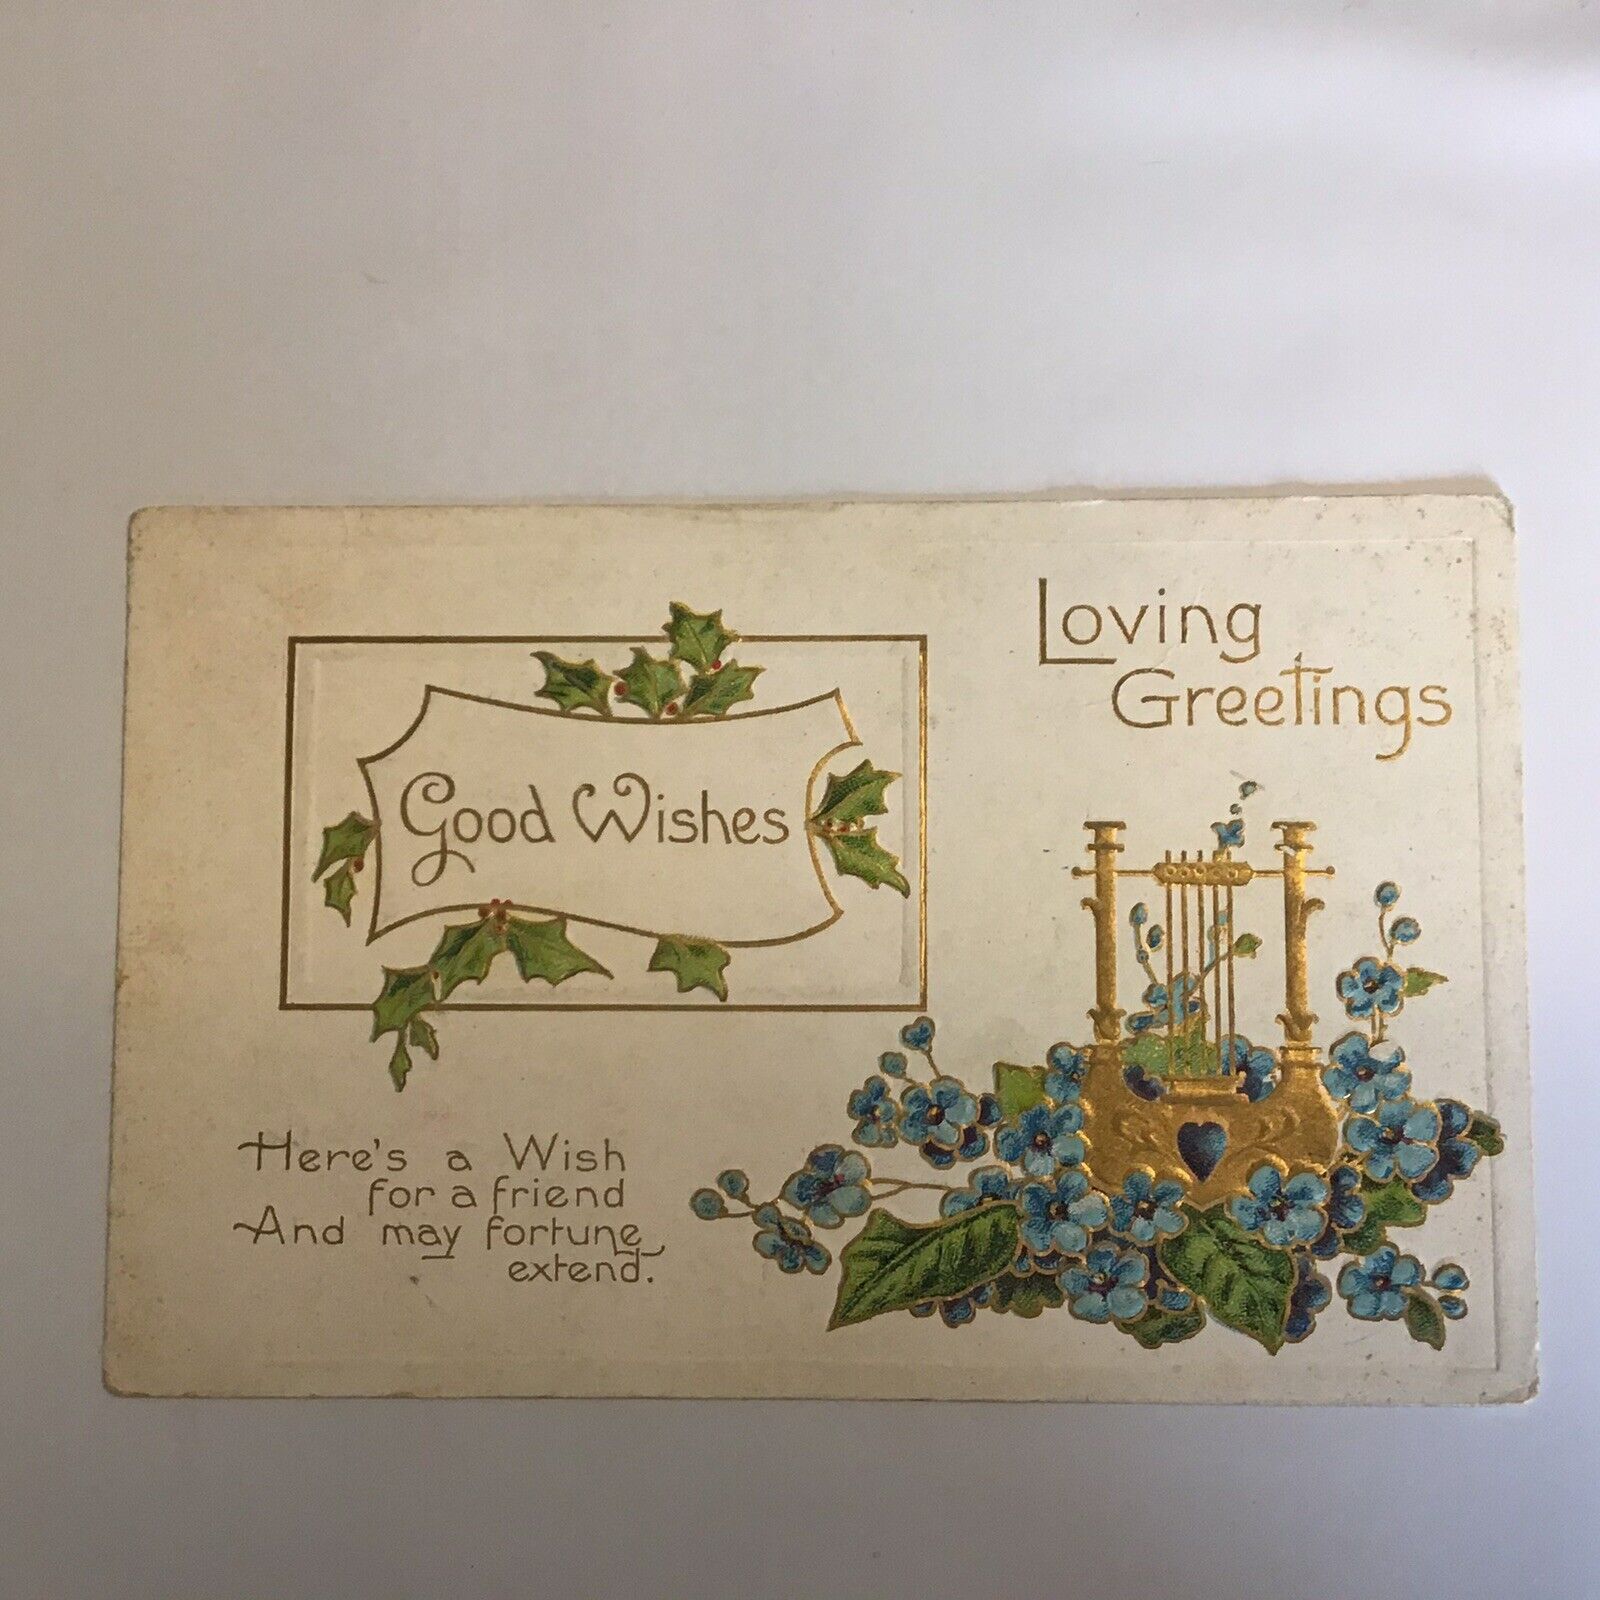 Good Wishes Loving Greetings Unposted Vintage Postcard 